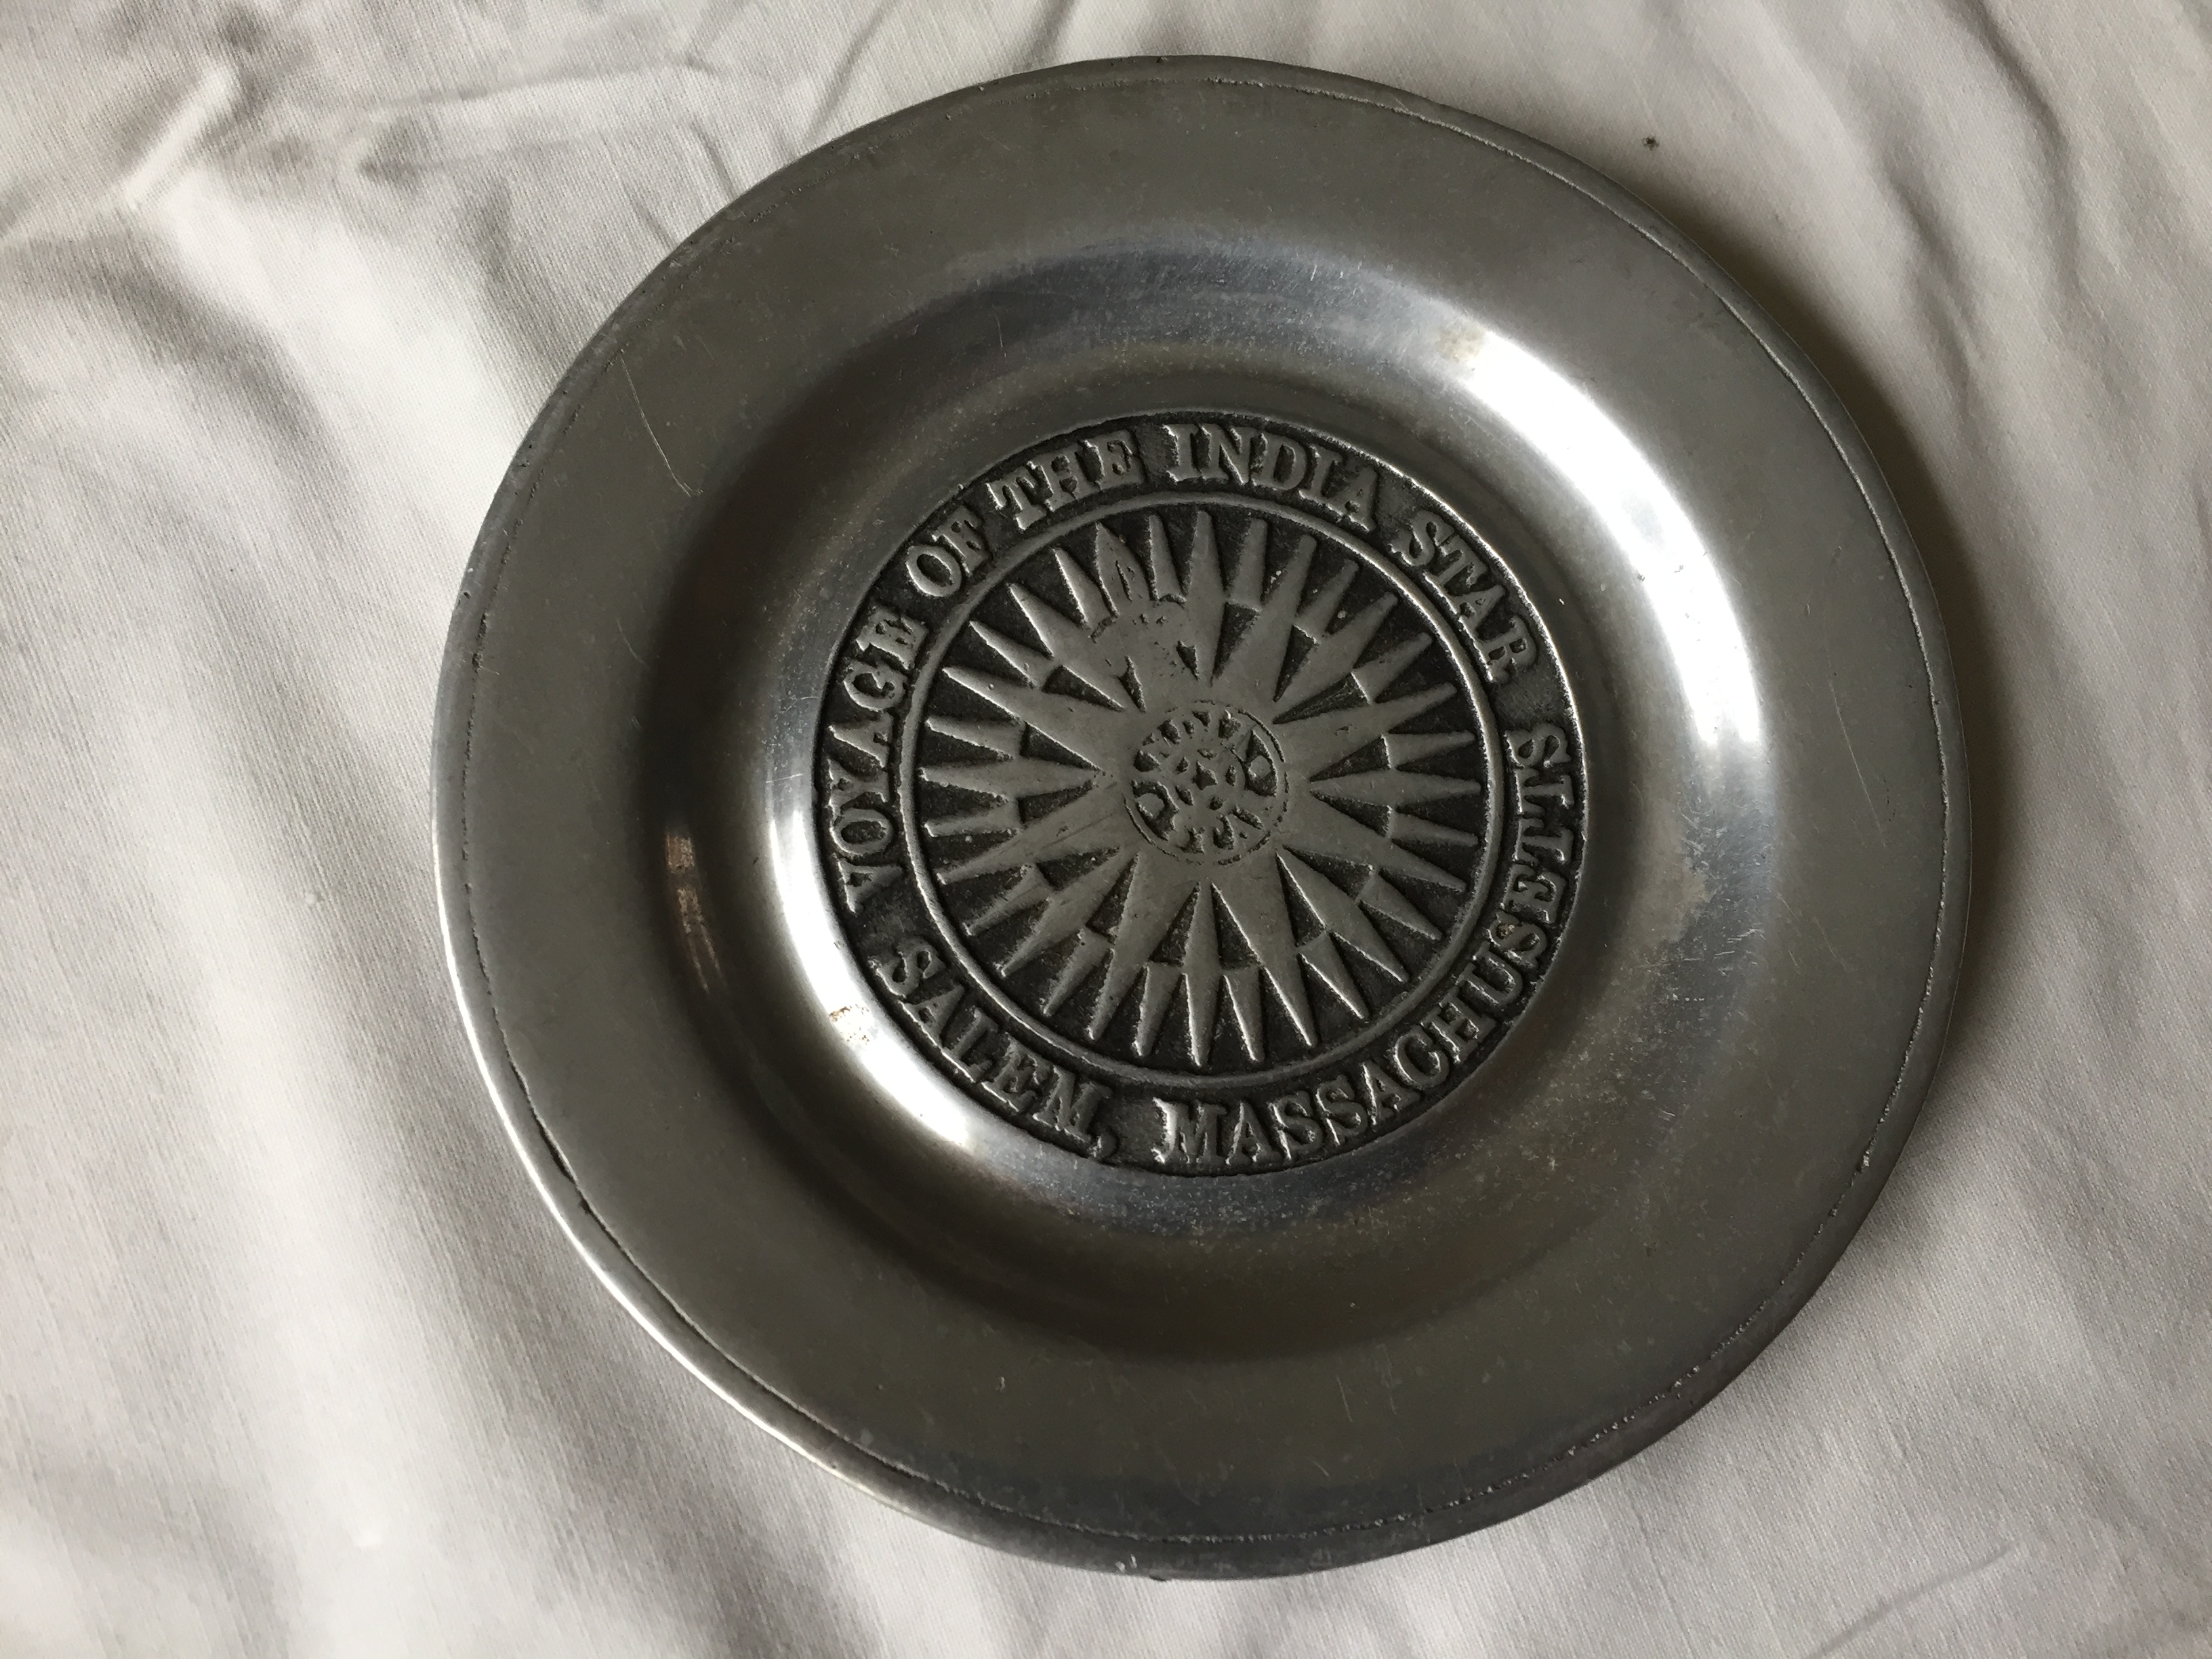 SOUVENIR DISH FROM THE VESSEL THE INDIA STAR 